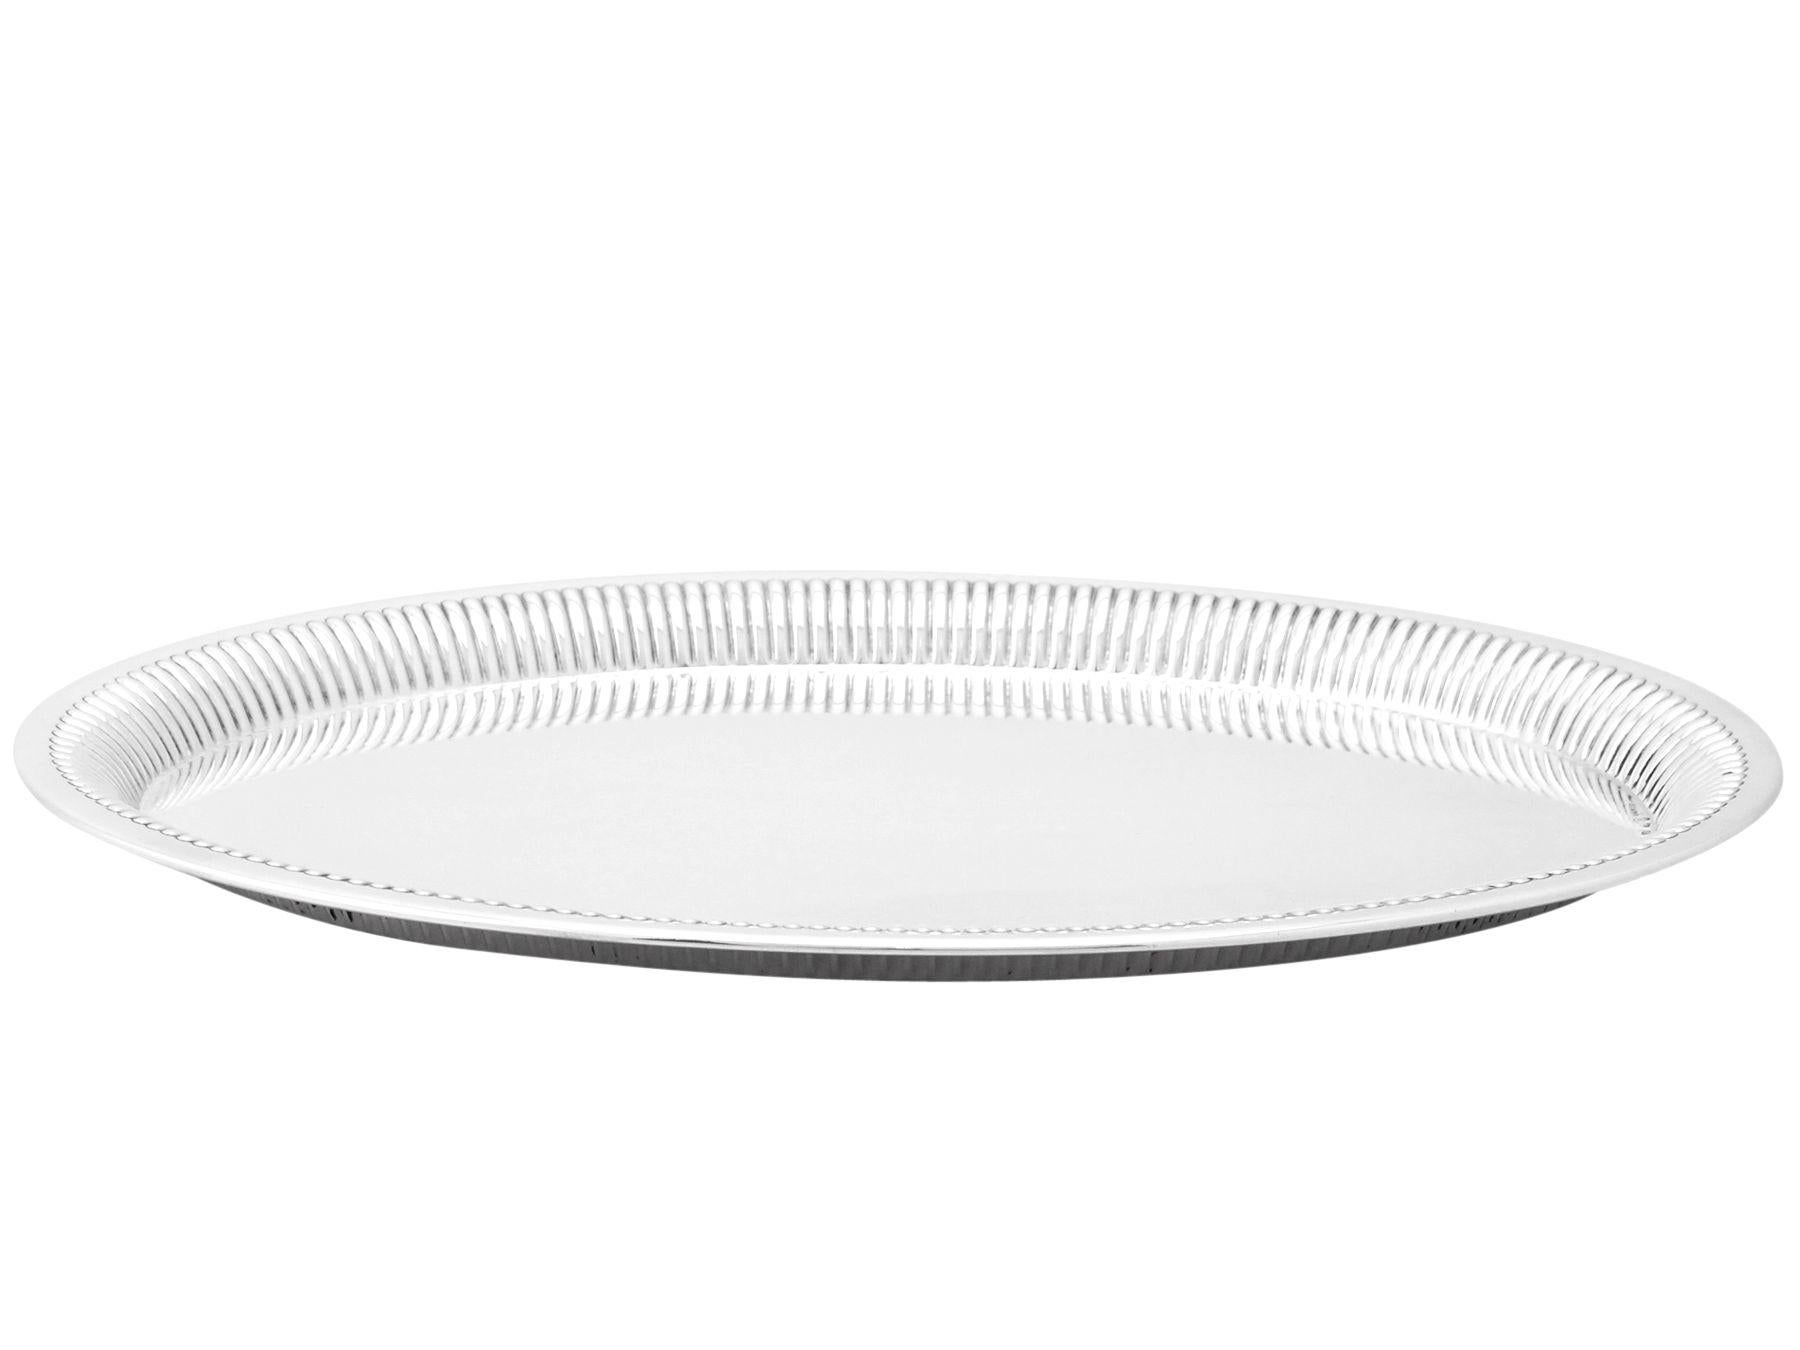 A fine antique German 800 standard silver salver; an addition to our continental silver collection.

This fine antique German 800 standard silver salver has plain oval form.

The surface of the silver salver is plain and unembellished.

The raised